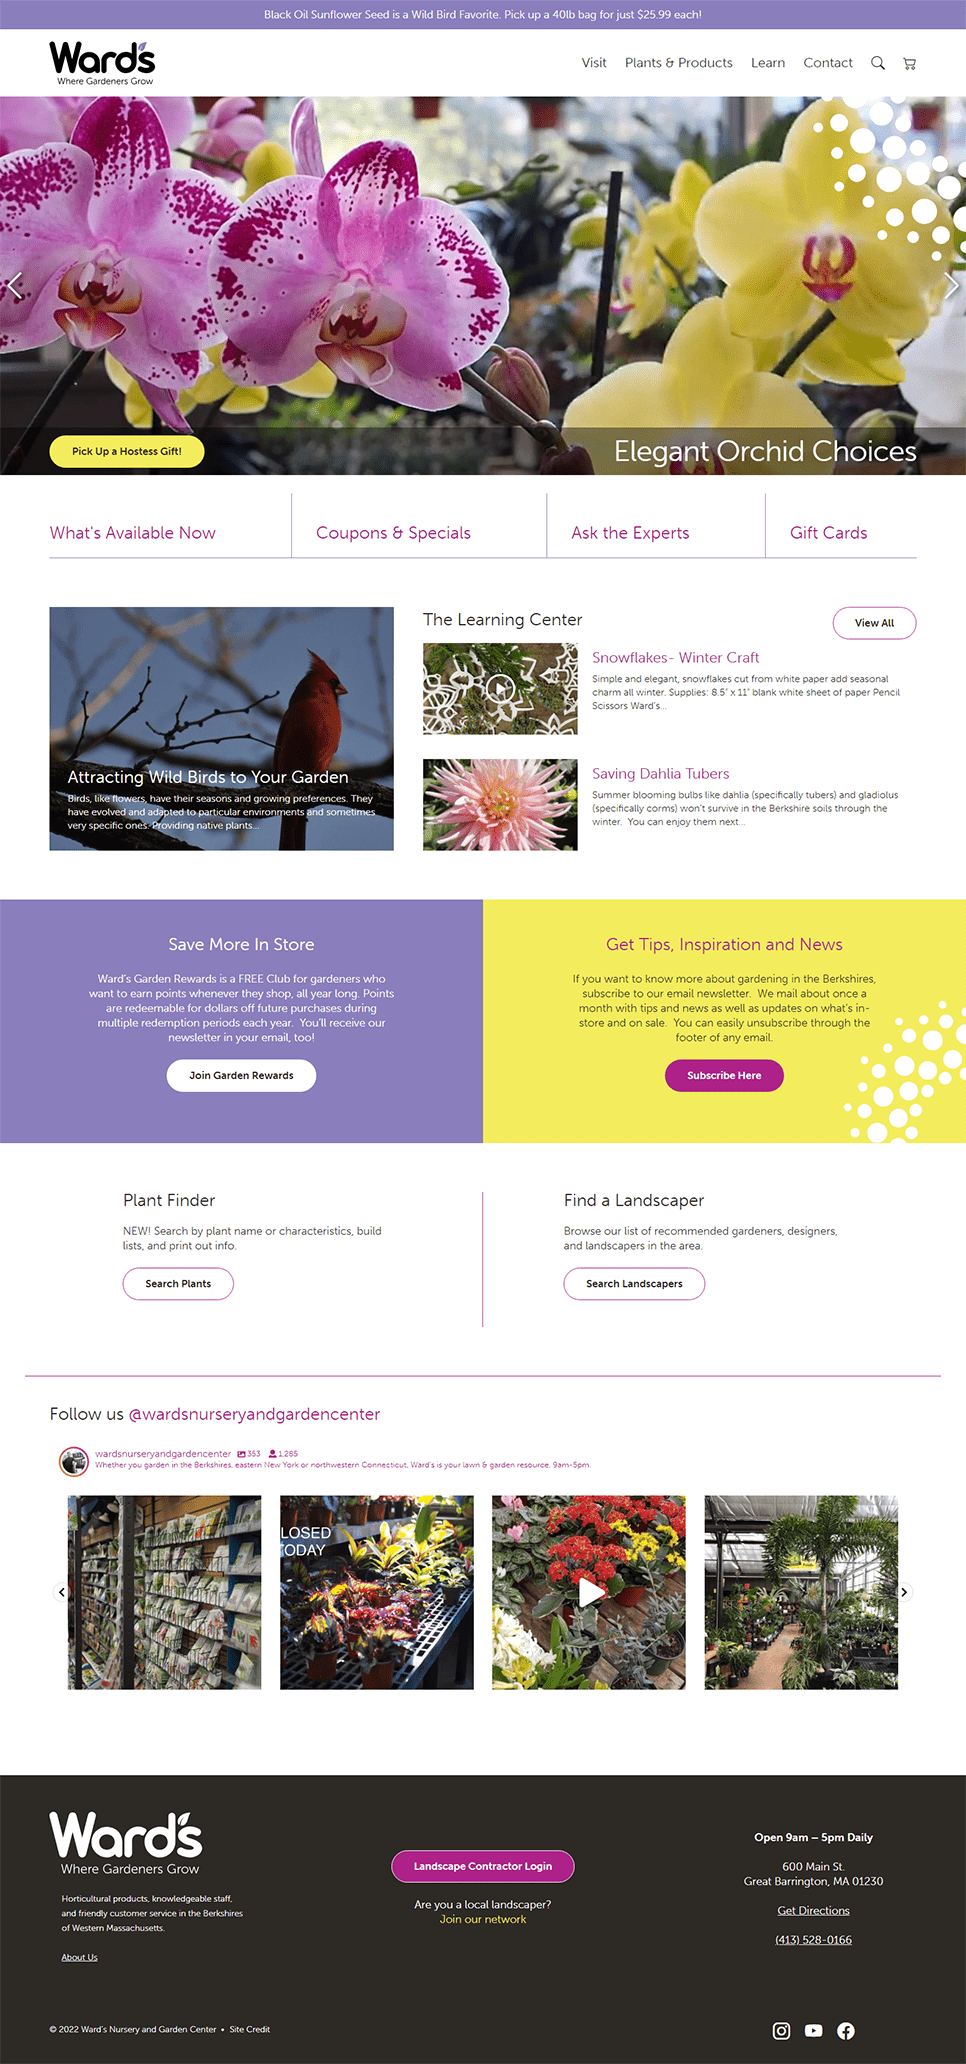 The completed website homepage for Ward’s Nursery